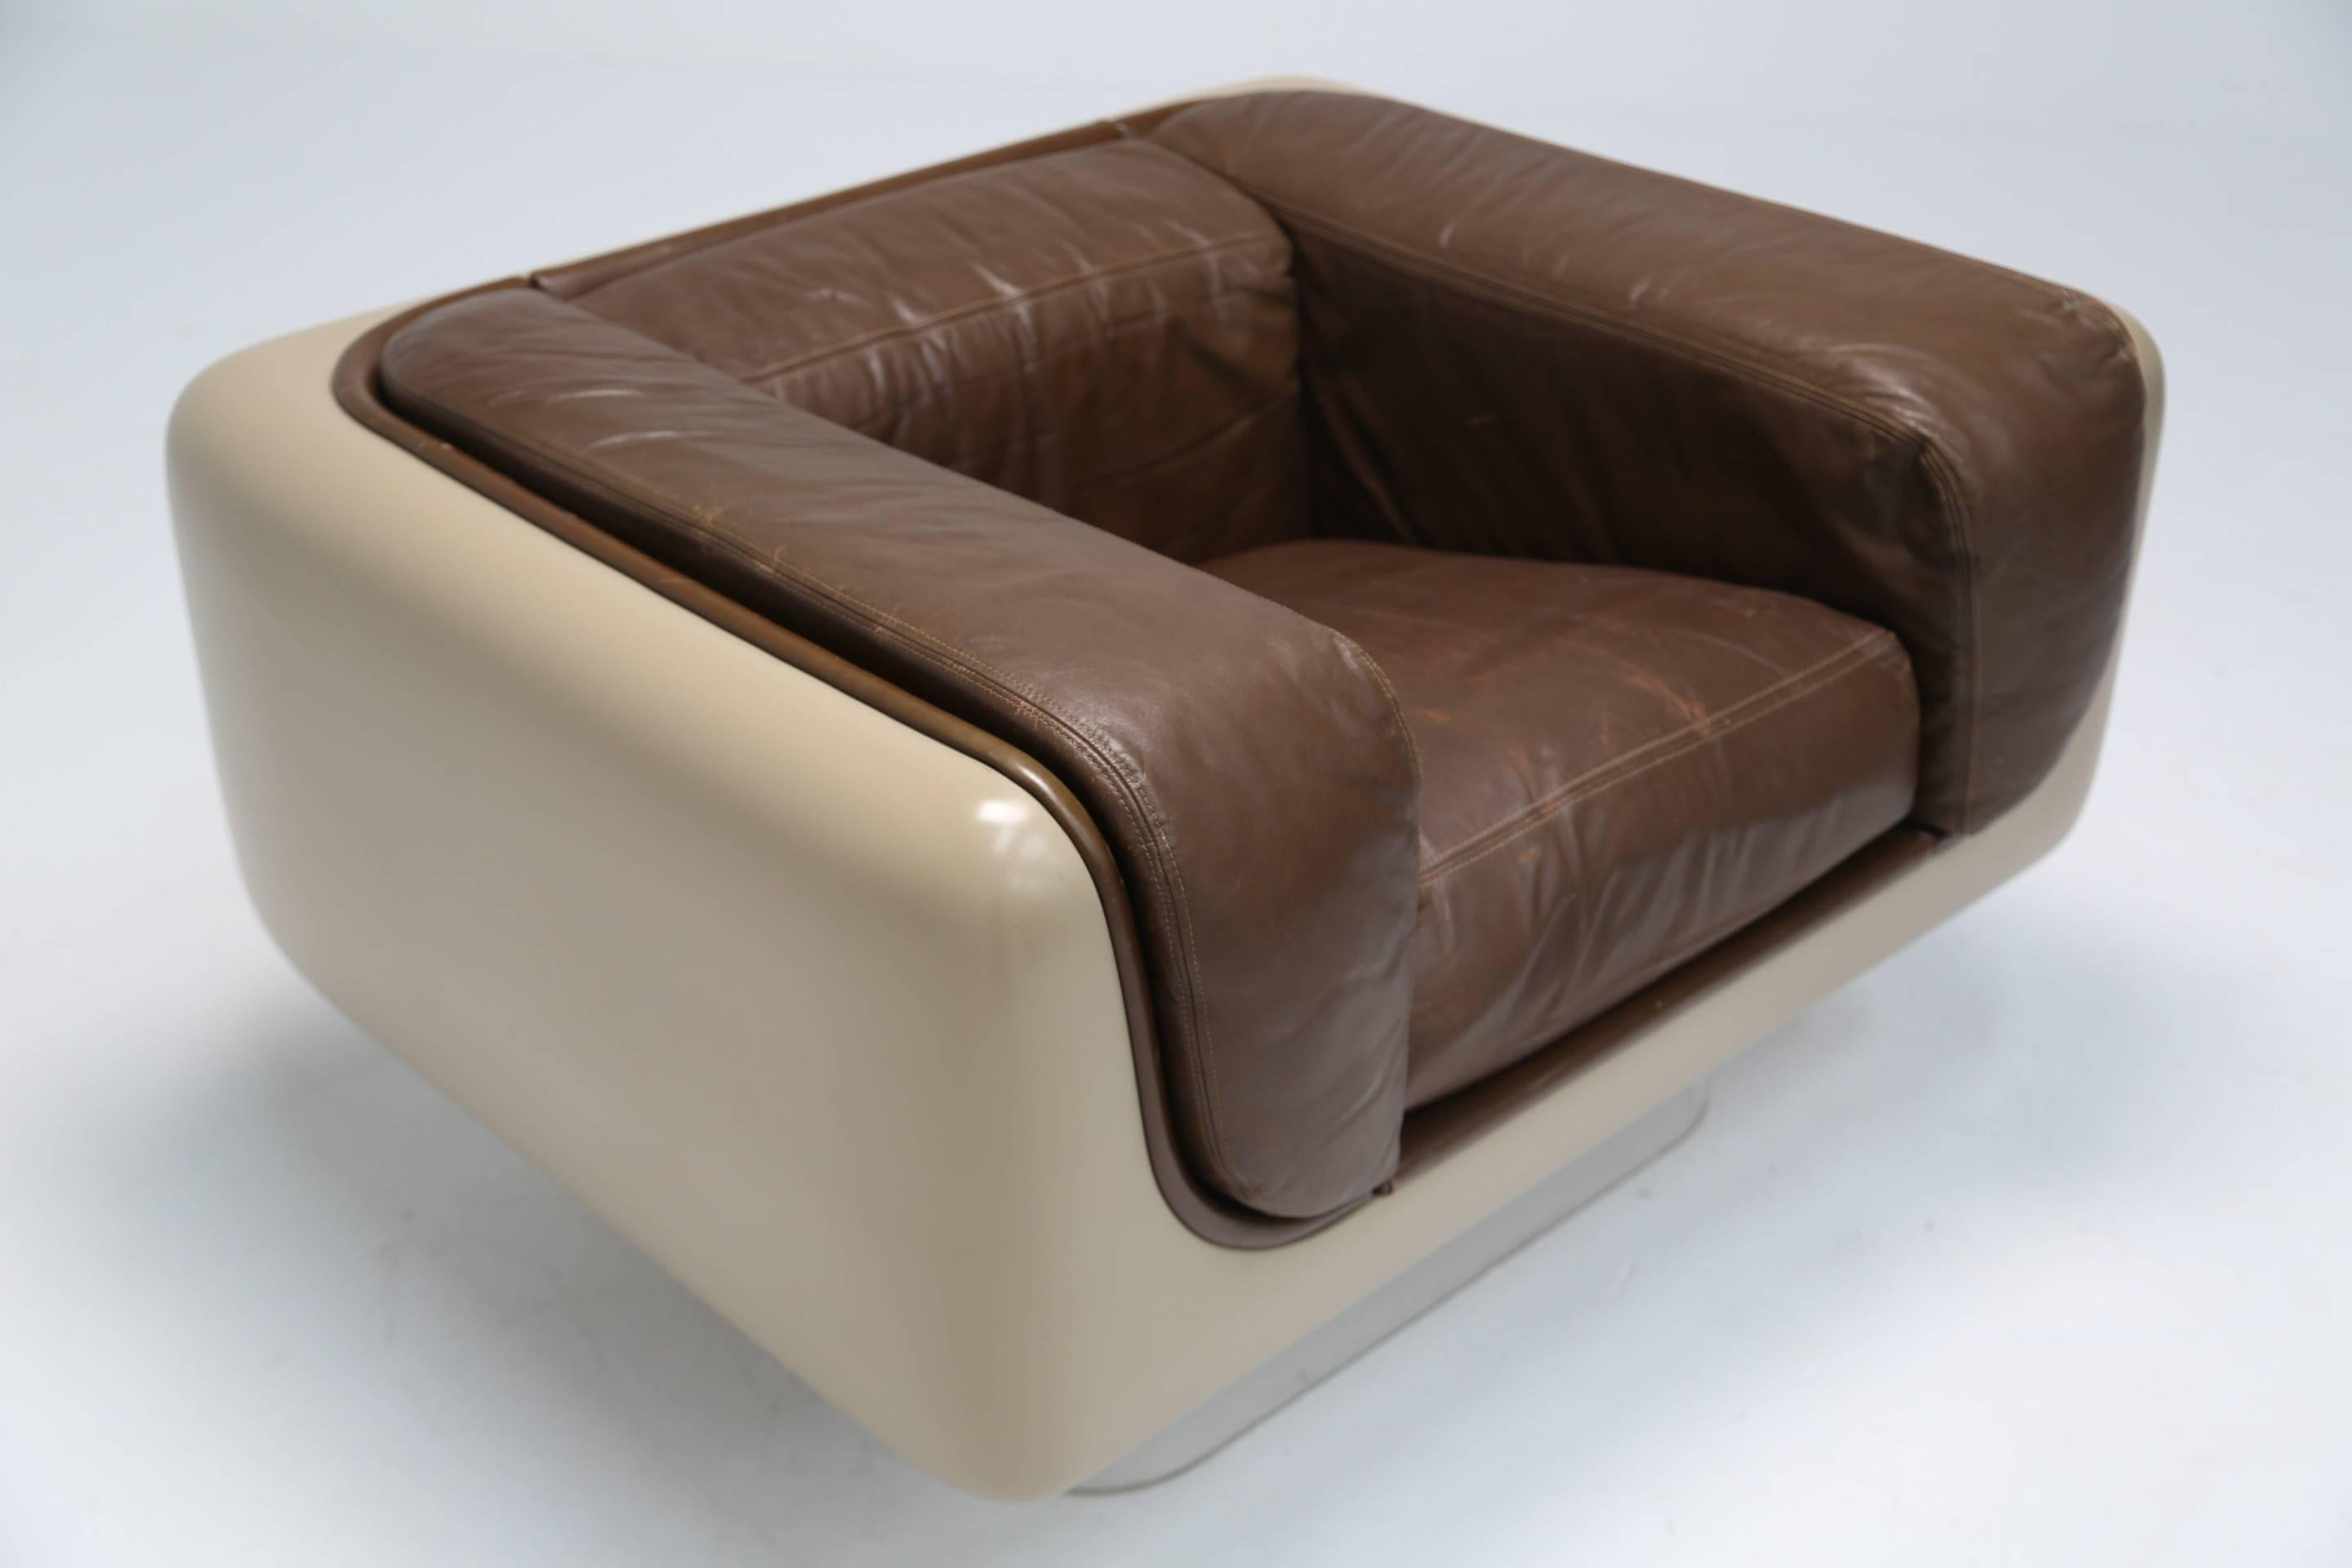 A steelcase soft seating armchair. The soft seating group line was introduced in 1974. Designed by William C (Bill) Andrus, it is made with fibreglass shells over lucite bases, with leather upholstery. The super soft seats are complimented by the